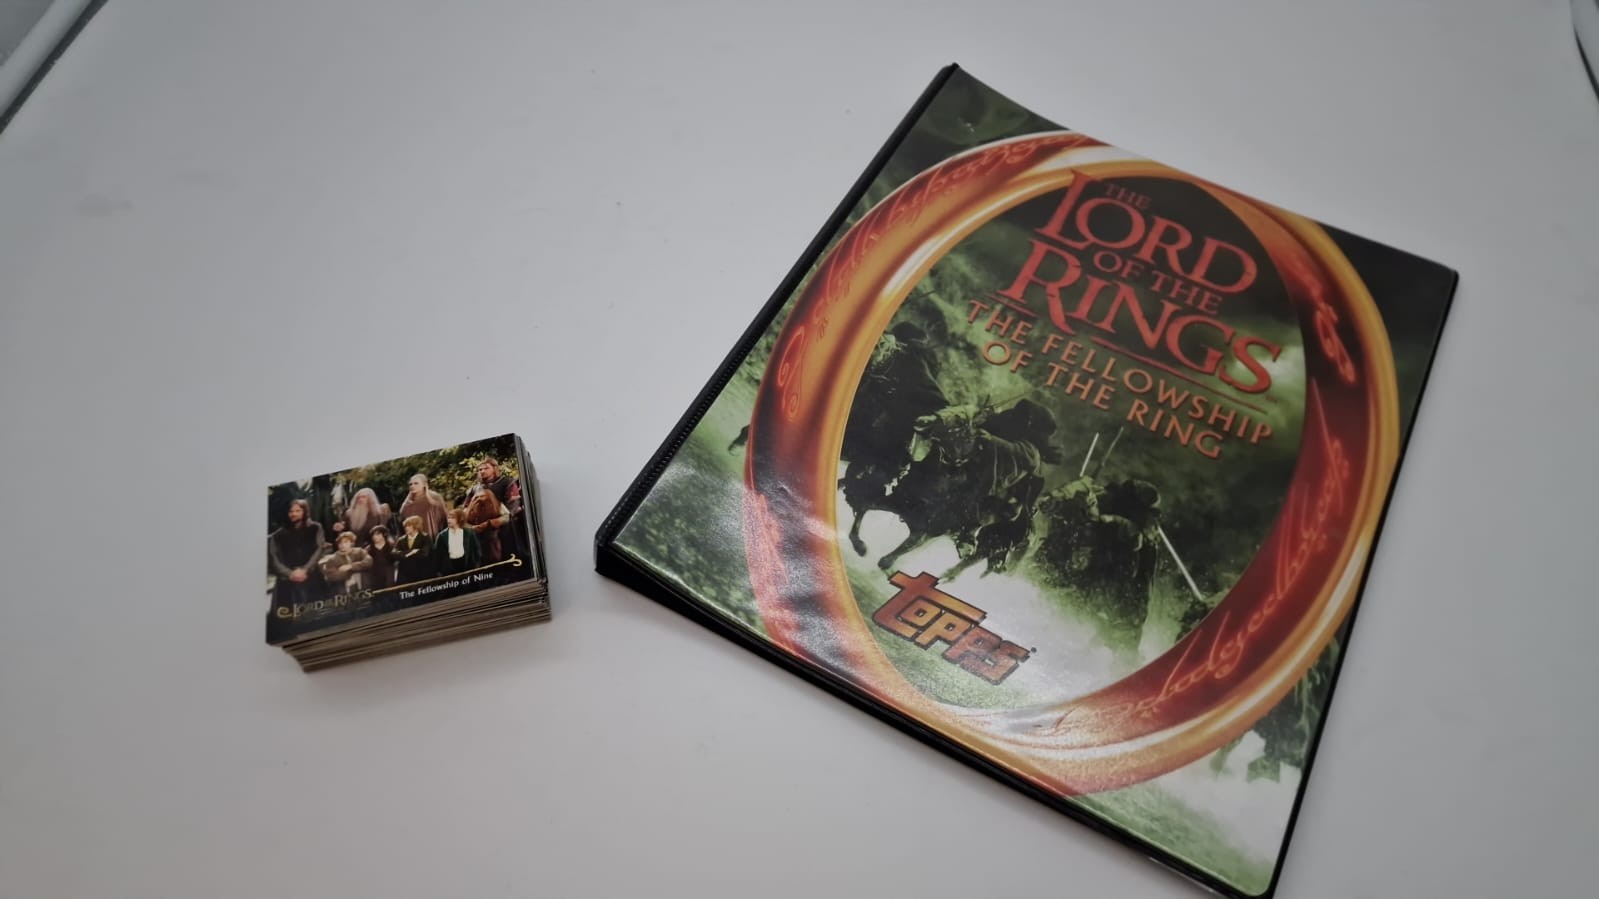 Lord of the rings fellowship of the ring movie topps trading card plus trading card Binder, near